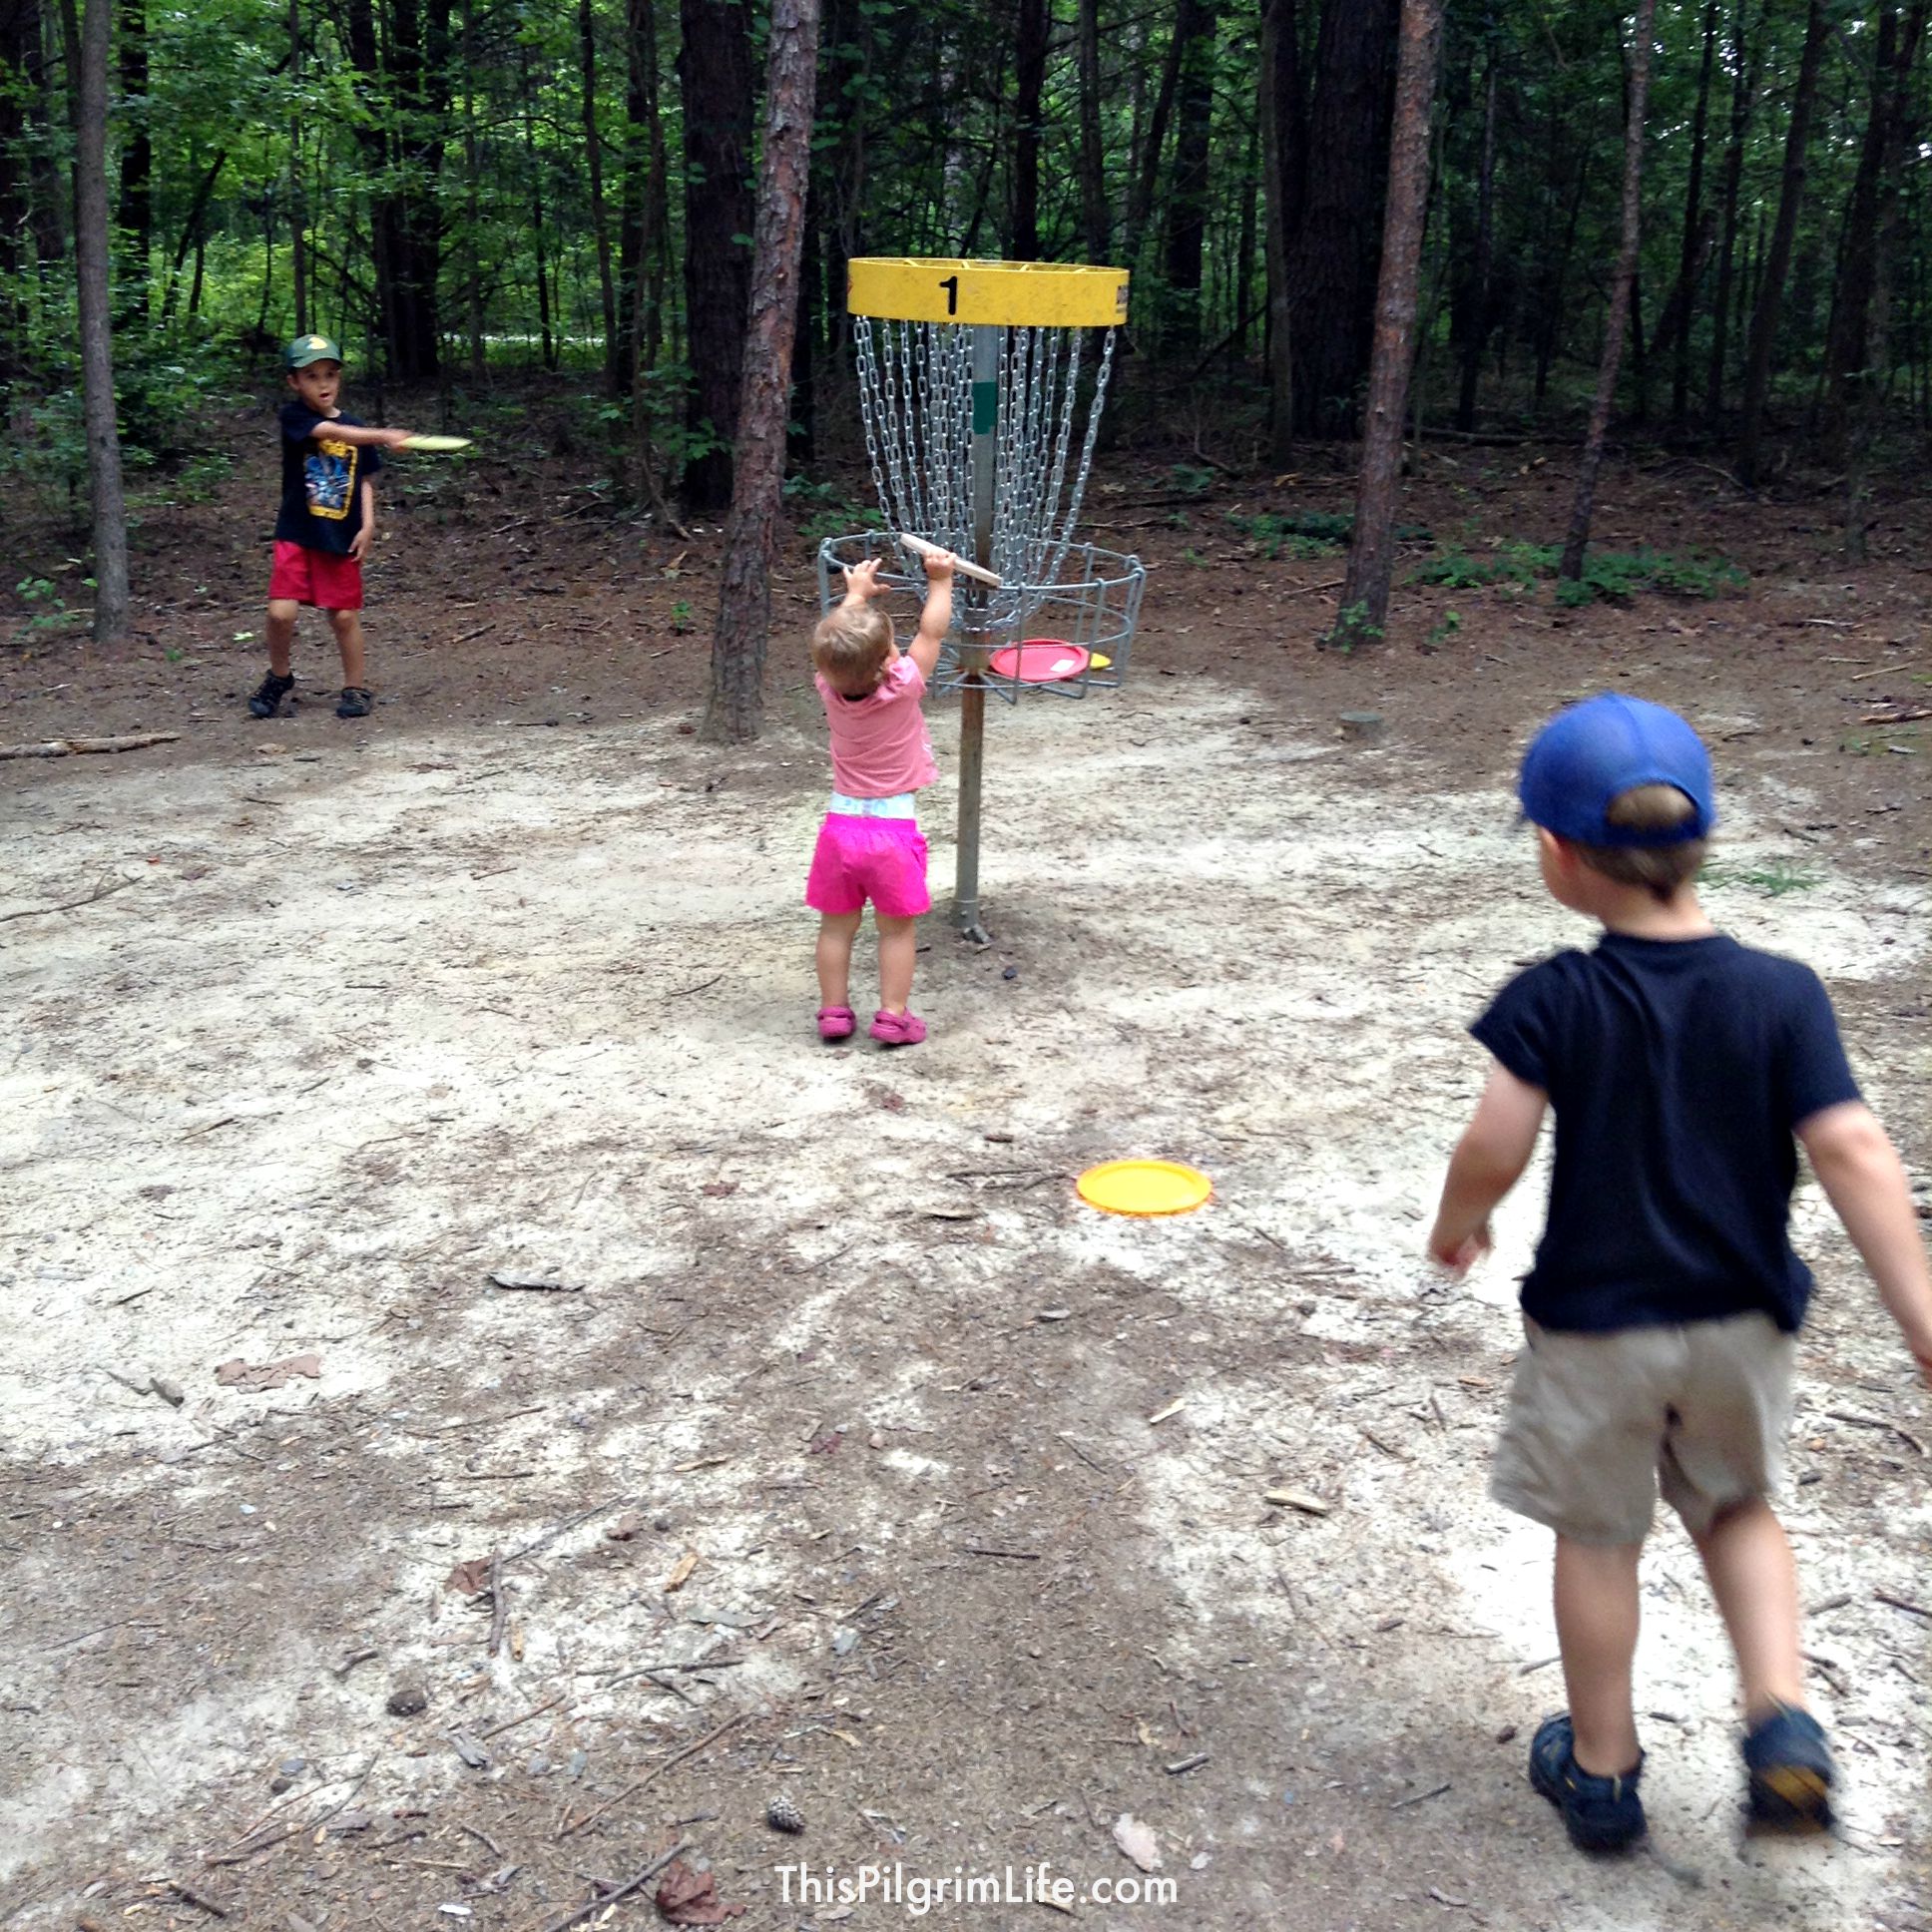 This is one our favorite games to play as a family-- it's free, outdoors, and something we can do all together (even the toddler!). 